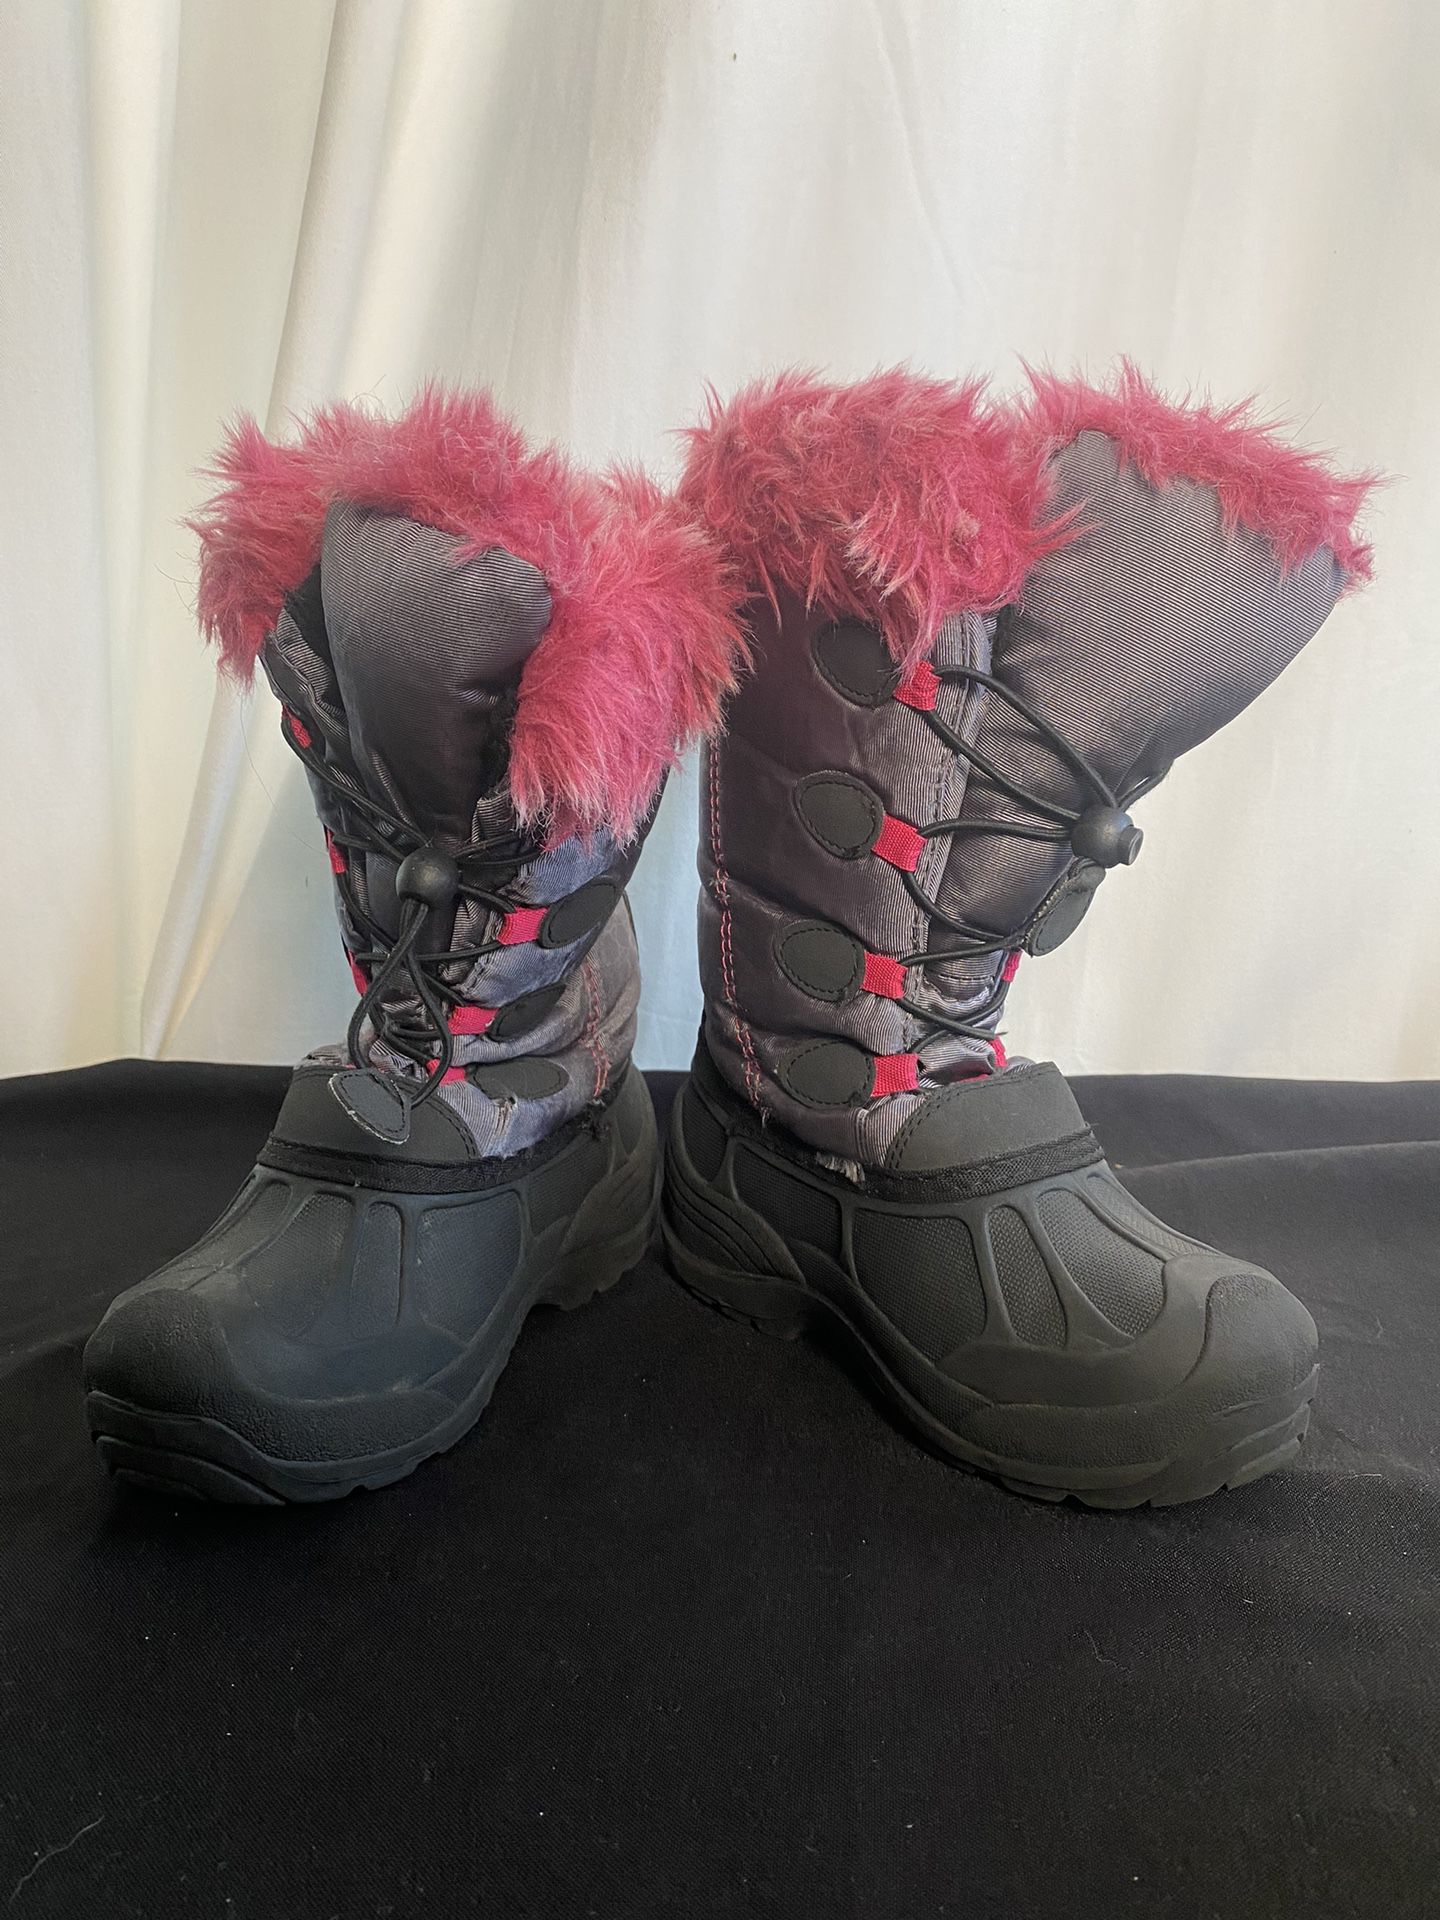 IC3FACE Girls Size 2 Kids Gray Pink Faux Fur Lined Winter Waterproof Snow Rain Boots Insulated Hightop w/ Pull Strap Laces